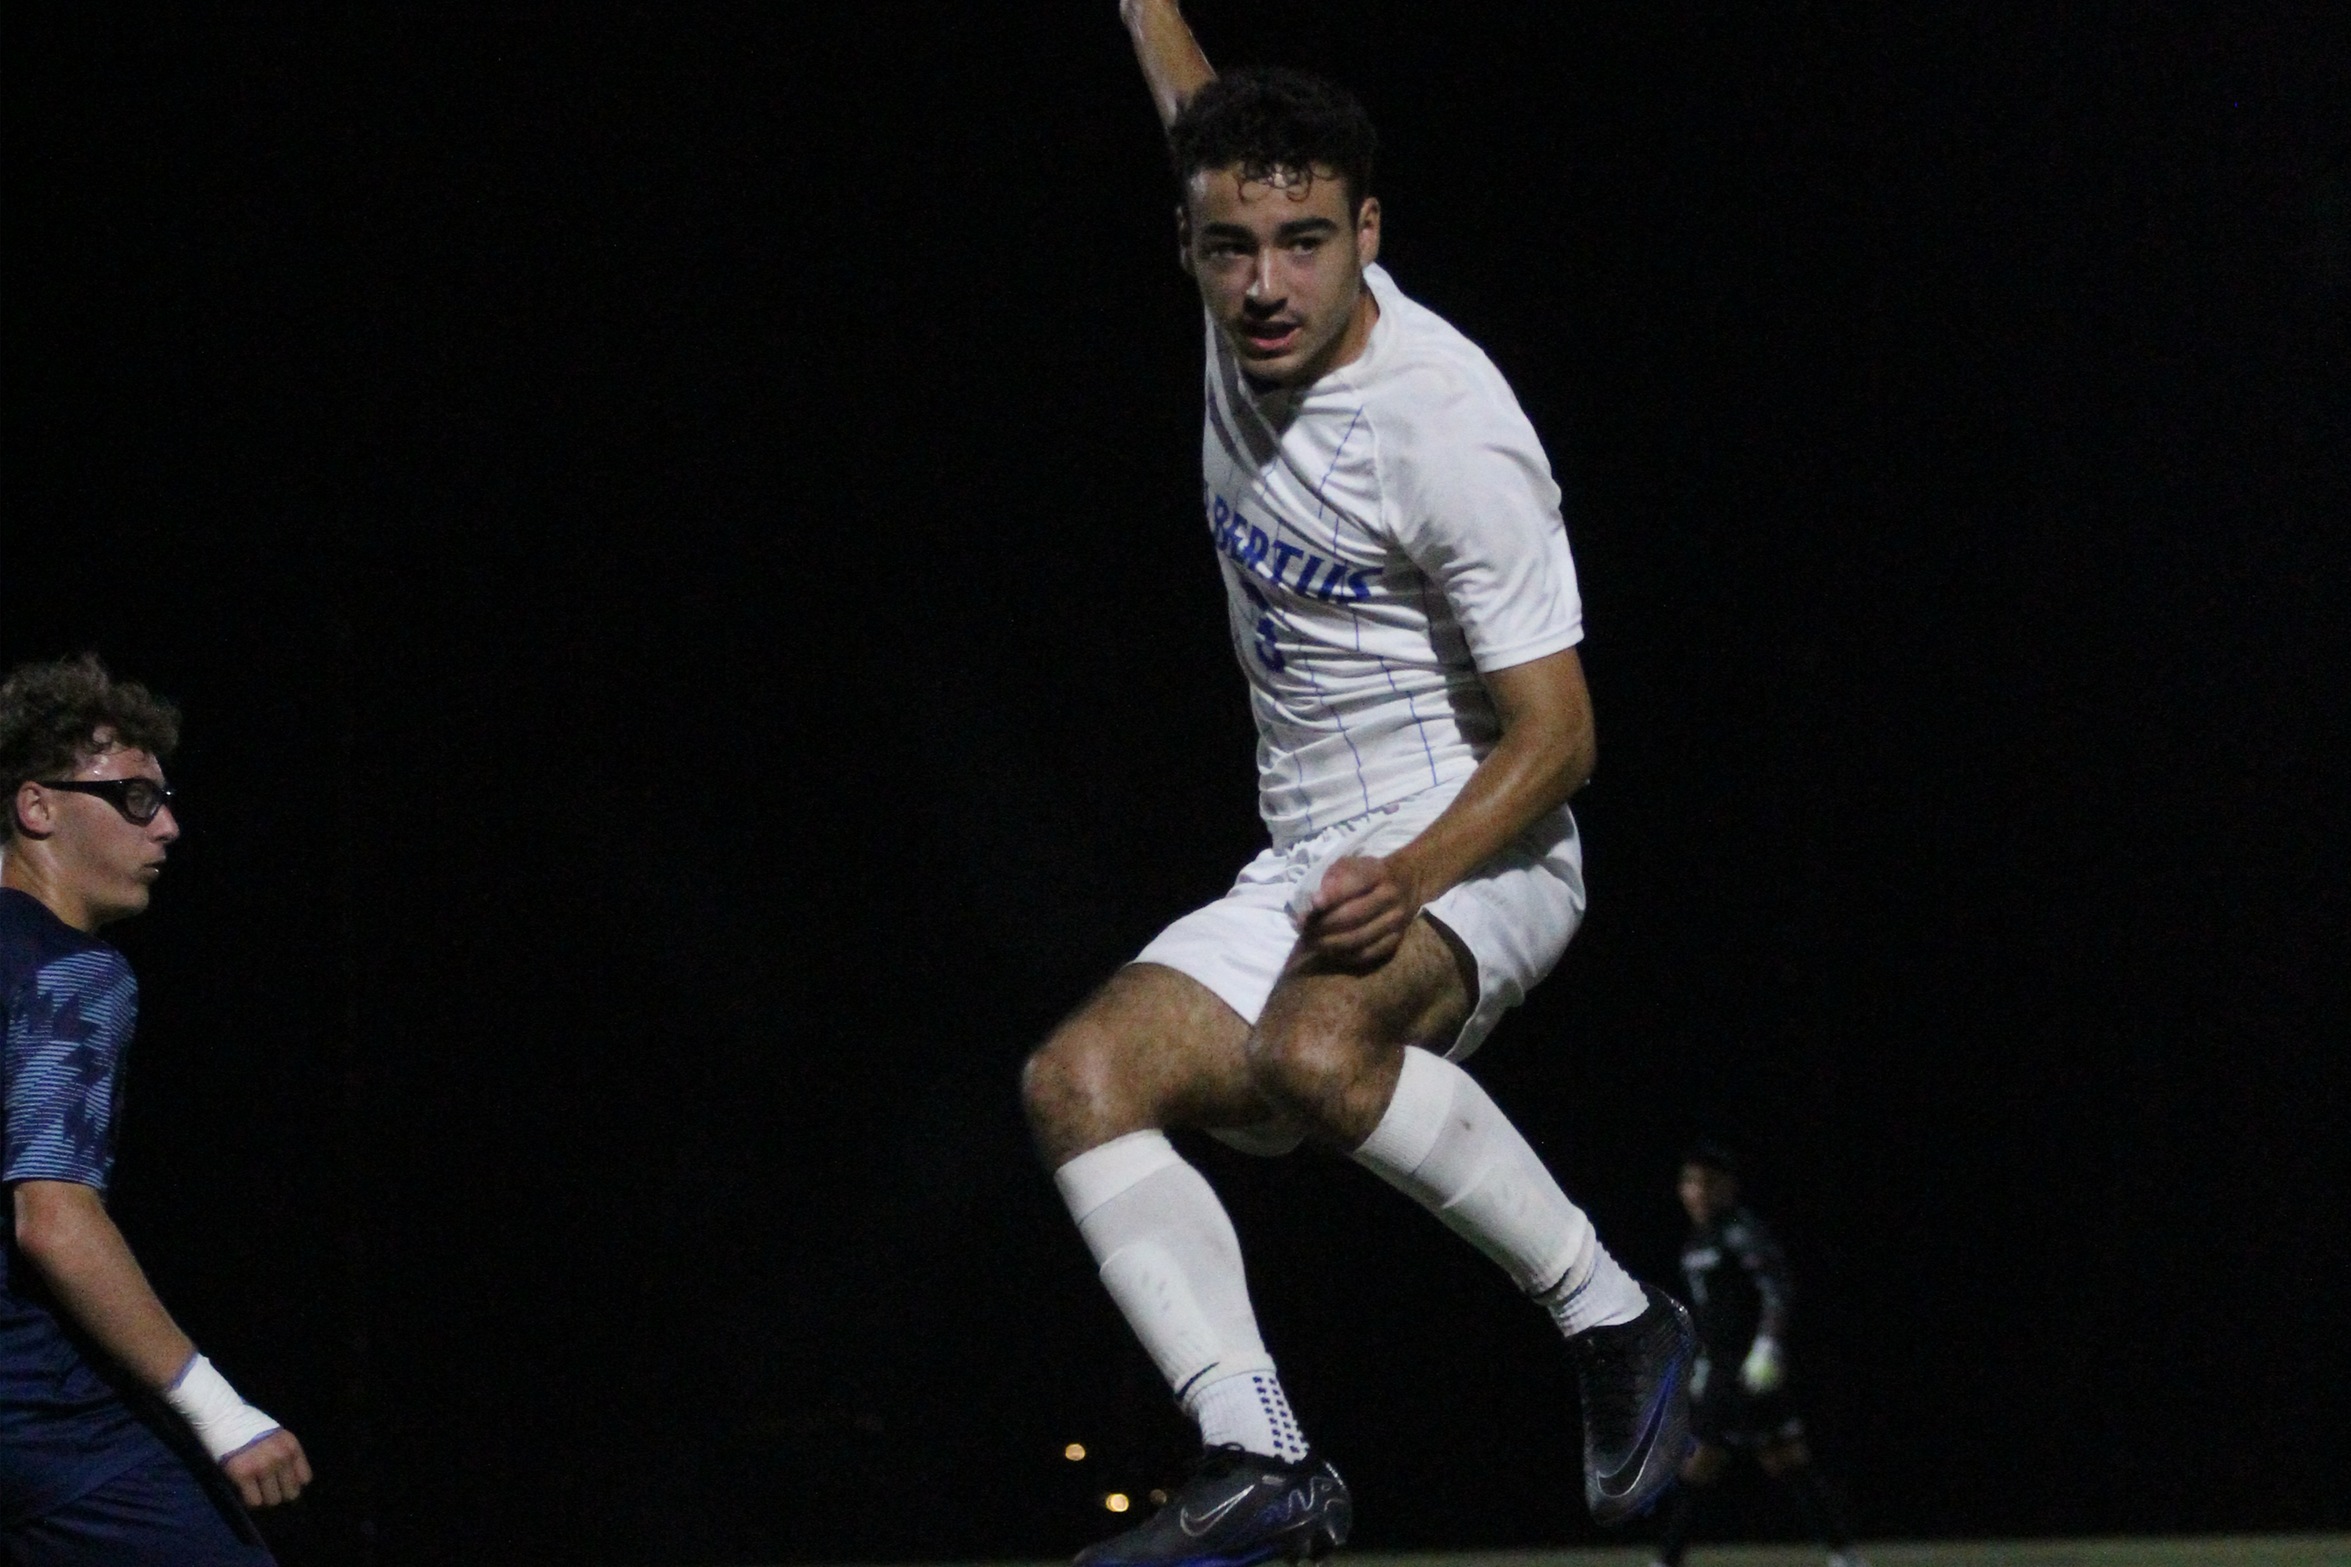 Men's Soccer Opens Up GNAC Play With Tie Against New England College